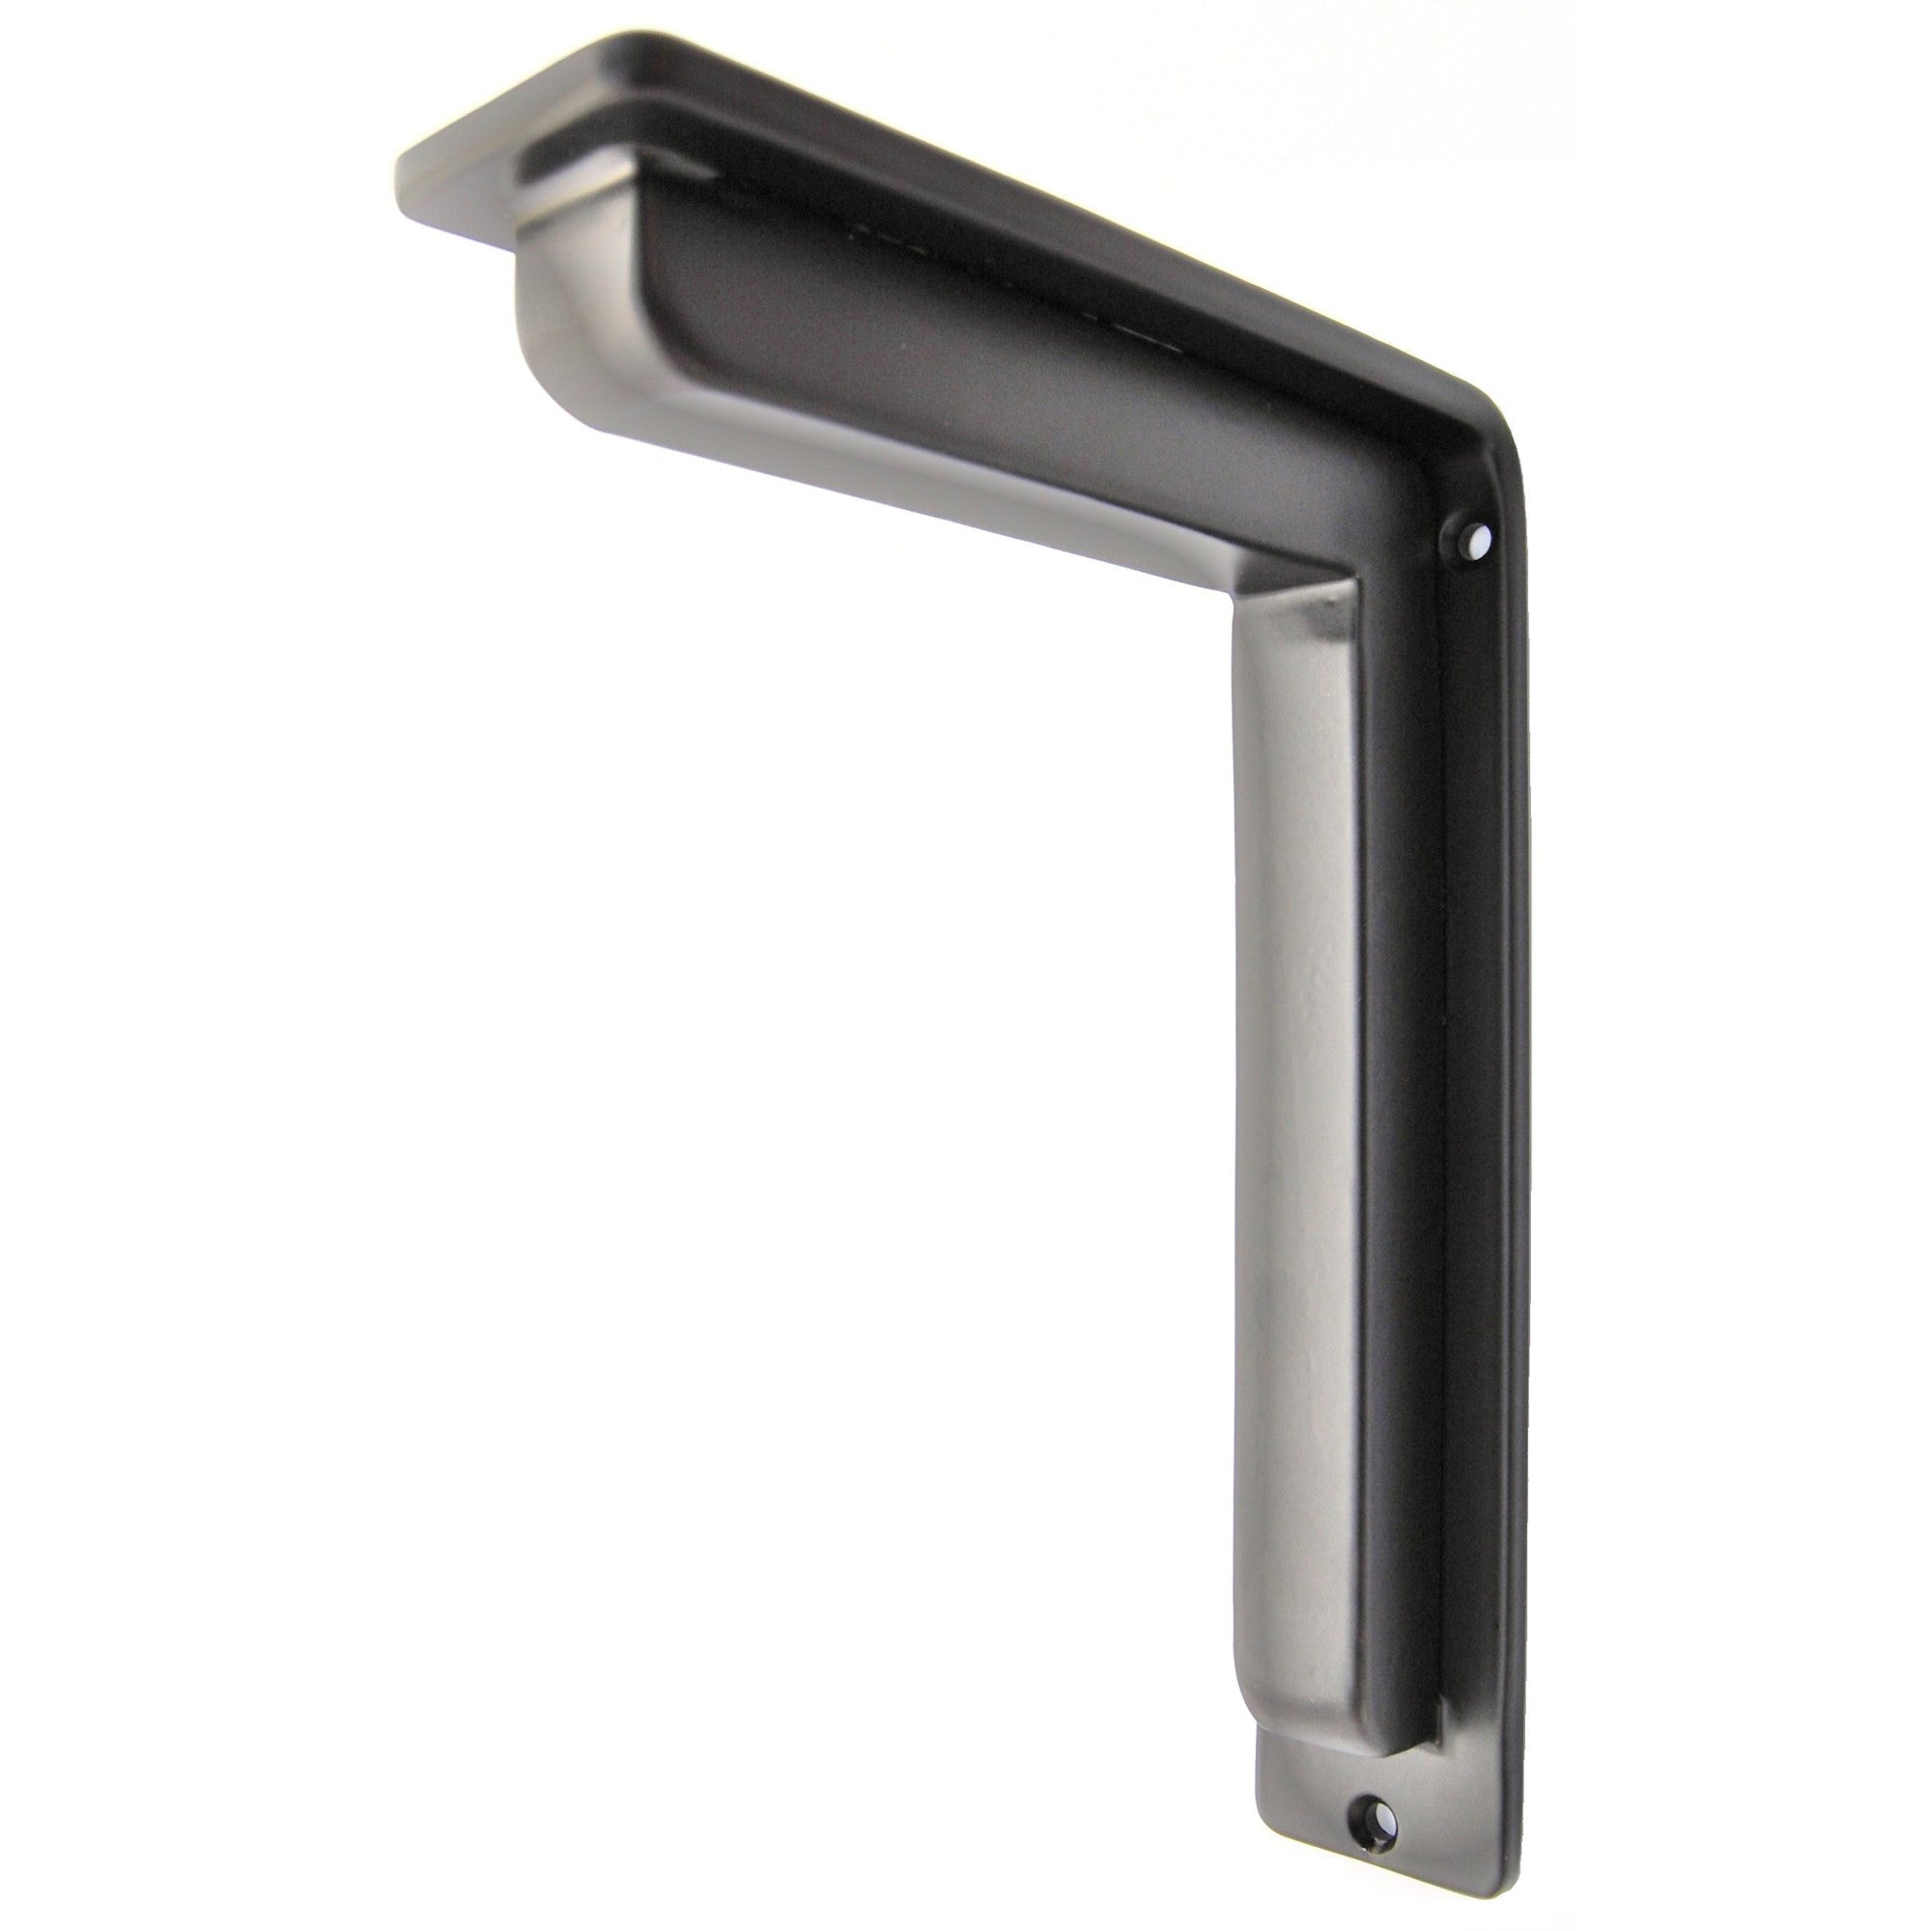 Freeman Iron Corbel Countertop Support Bracket In 10 Sizes And 7